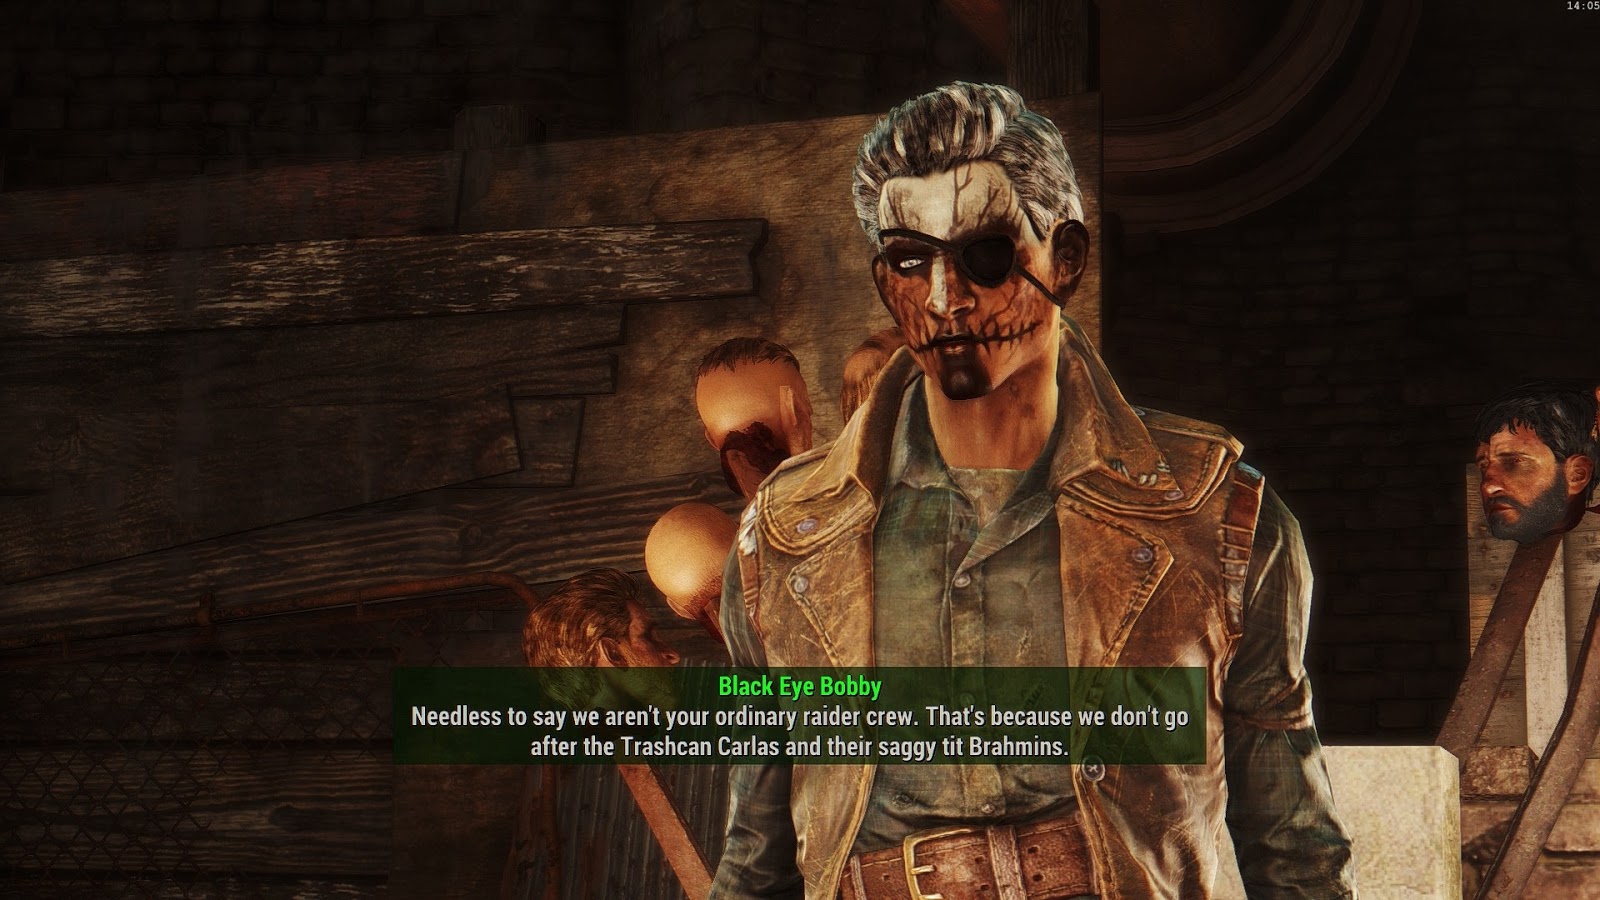 The Nocturnal Rambler Fallout 4 Mod Guide Recommendations And Mini Reviews